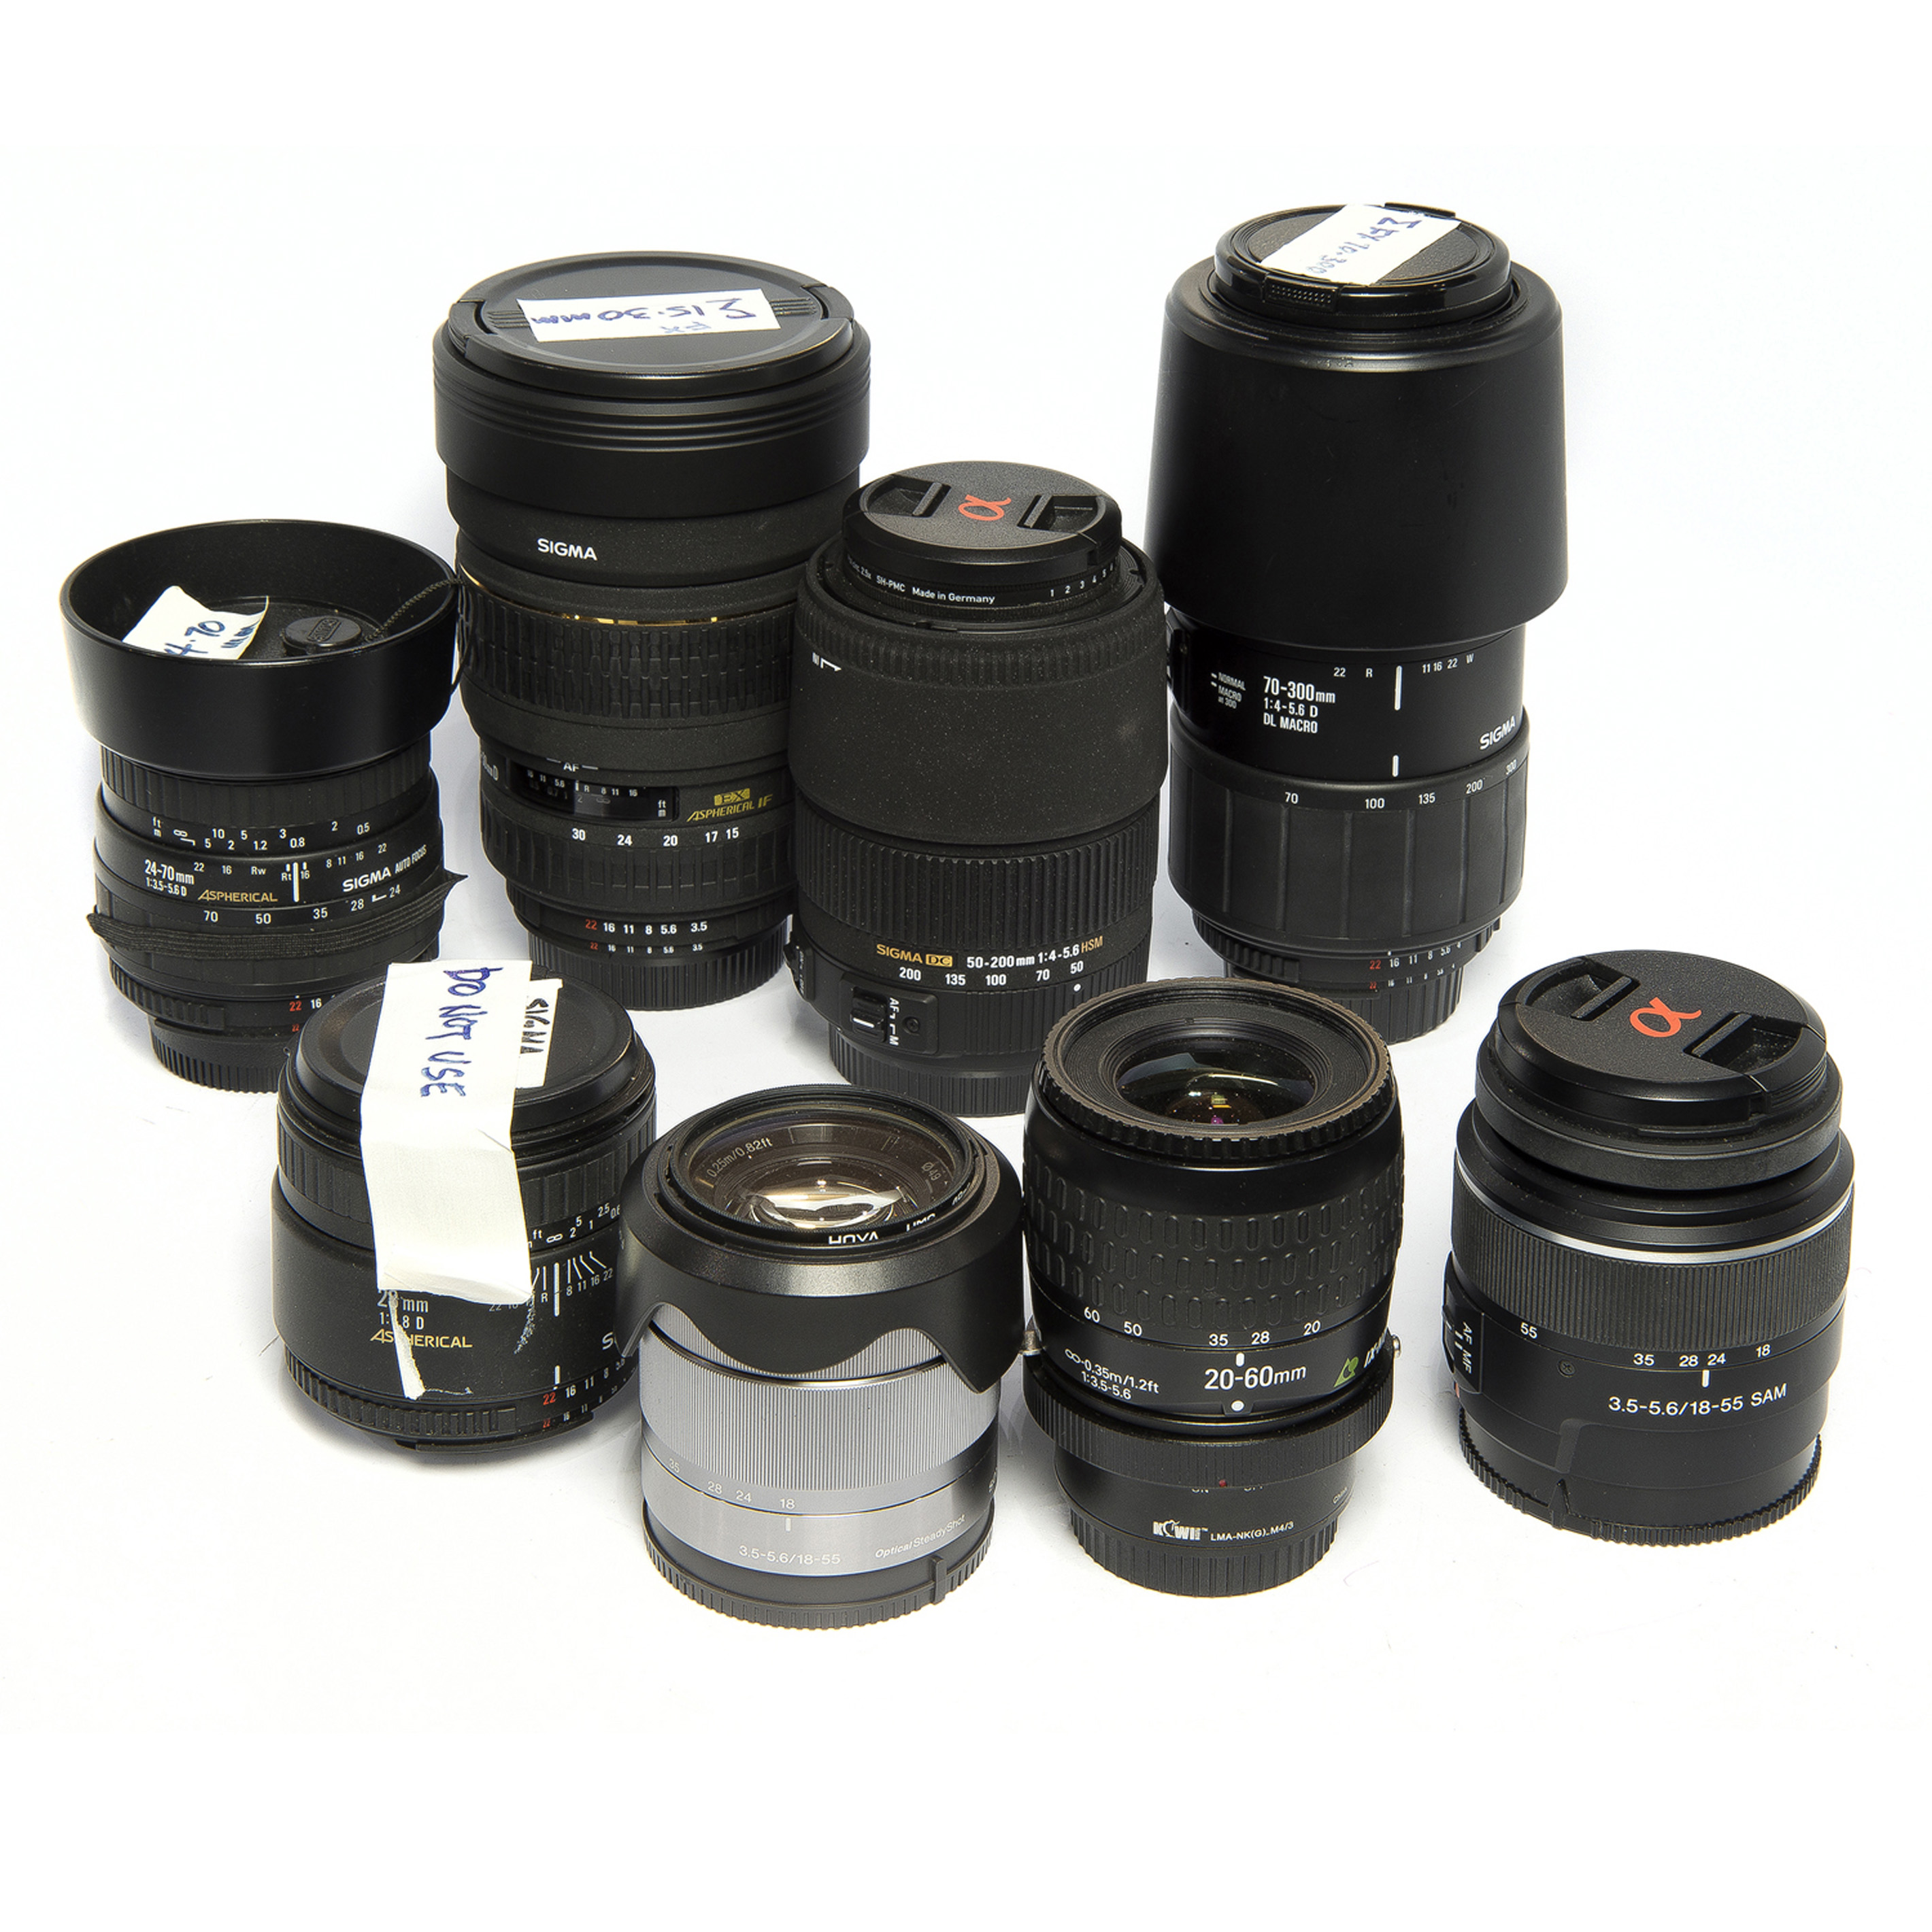  LOT OF 8 NIKON SIGMA AND SONY 3a4a00